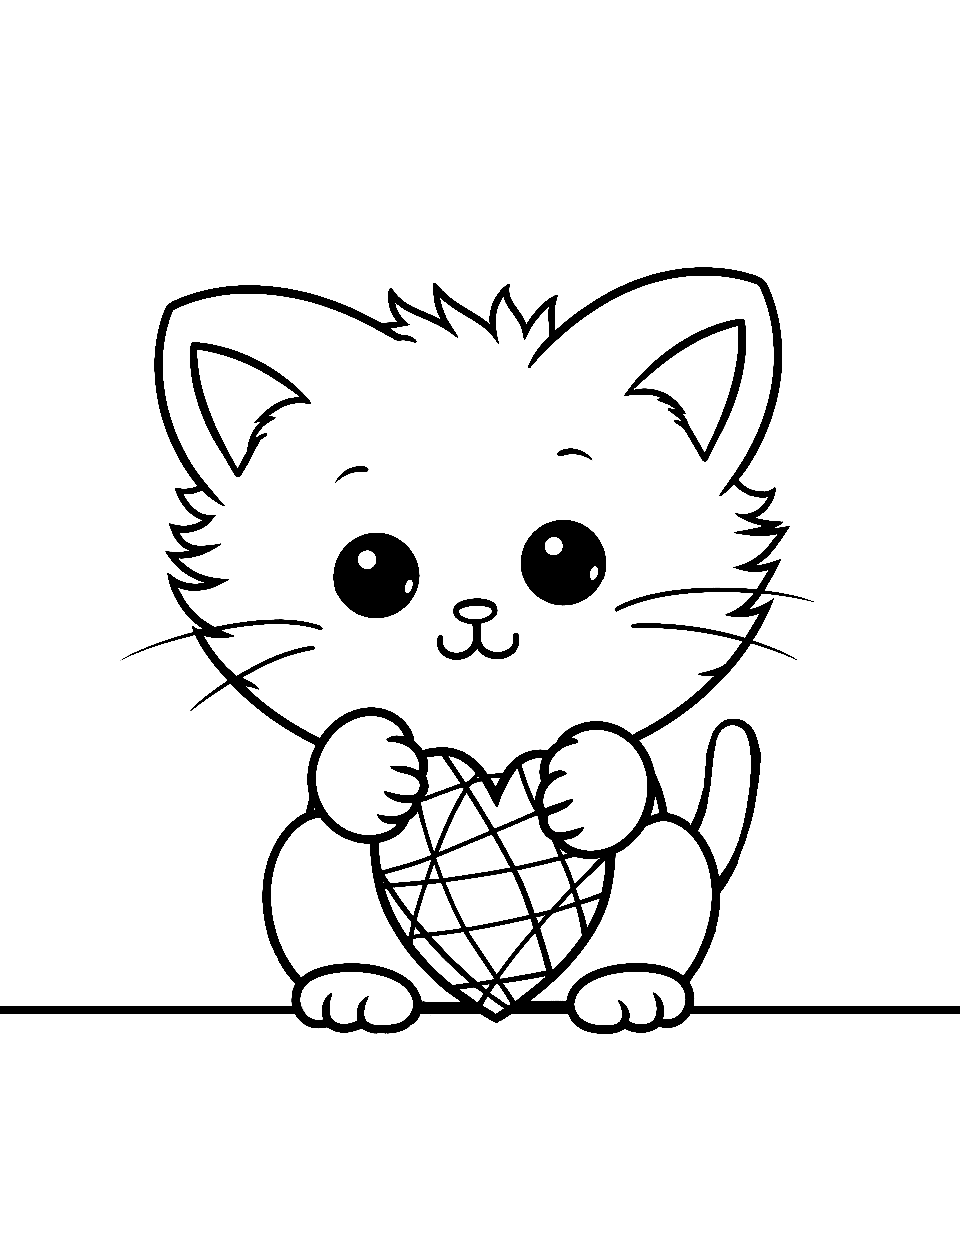 Kitten with a Yarn Heart Coloring Page - A playful kitten holding a heart-shaped yarn.